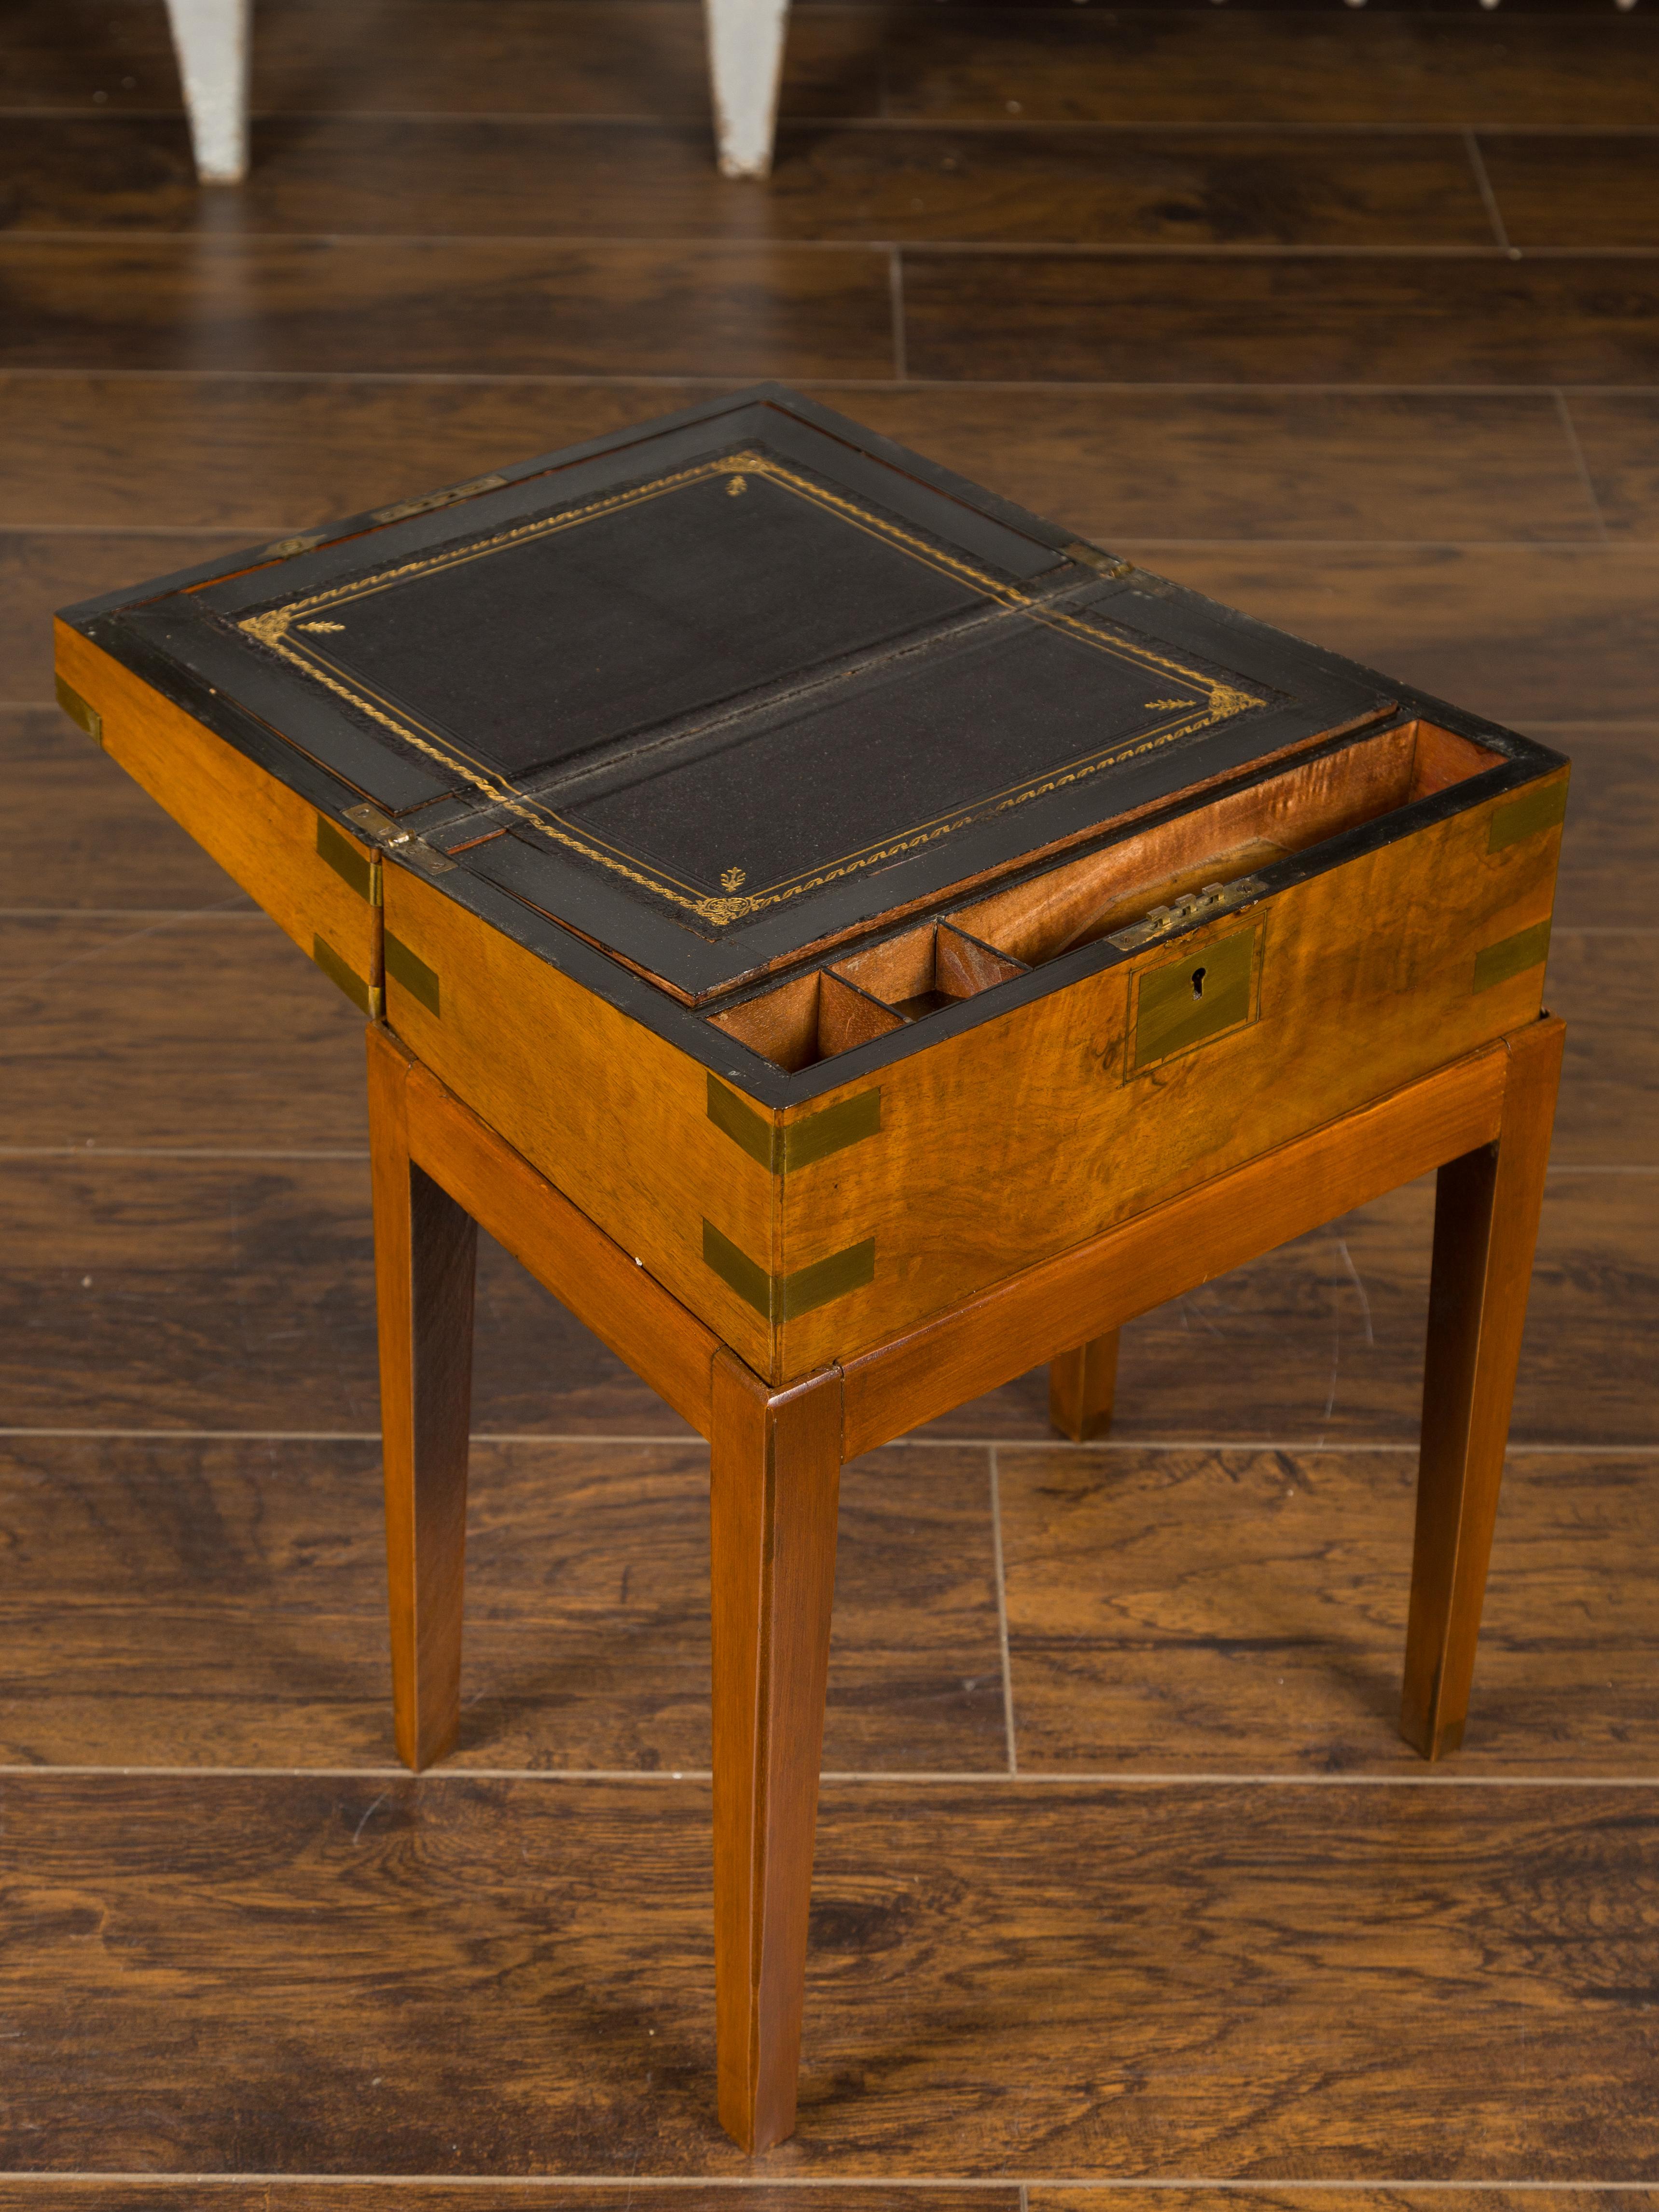 19th Century English 1850s Mahogany Lap Desk Box on Custom Stand Fitted with Black Leather